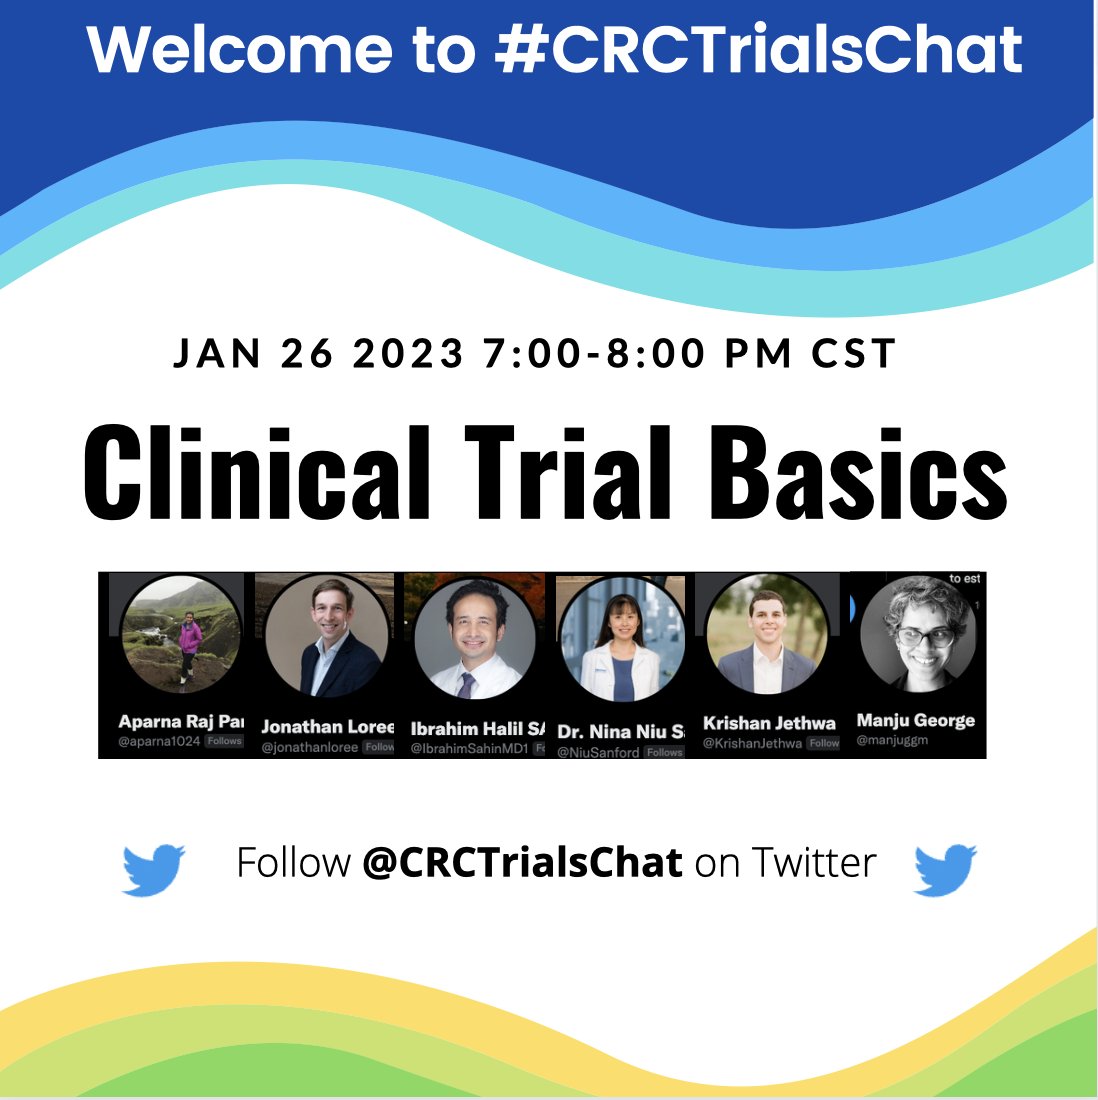 The 1st #CRCTrialsChat session of 2023 will be on Jan 26 7:00-8:00 PM CT
We start this year with #ClinicalTrial Basics
This year, in addition to Drs @aparna1024 @jonathanloree @NiuSanford @KrishanJethwa, Dr @IbrahimSahinMD1 joins us as a new #medonc moderator!
Welcome!